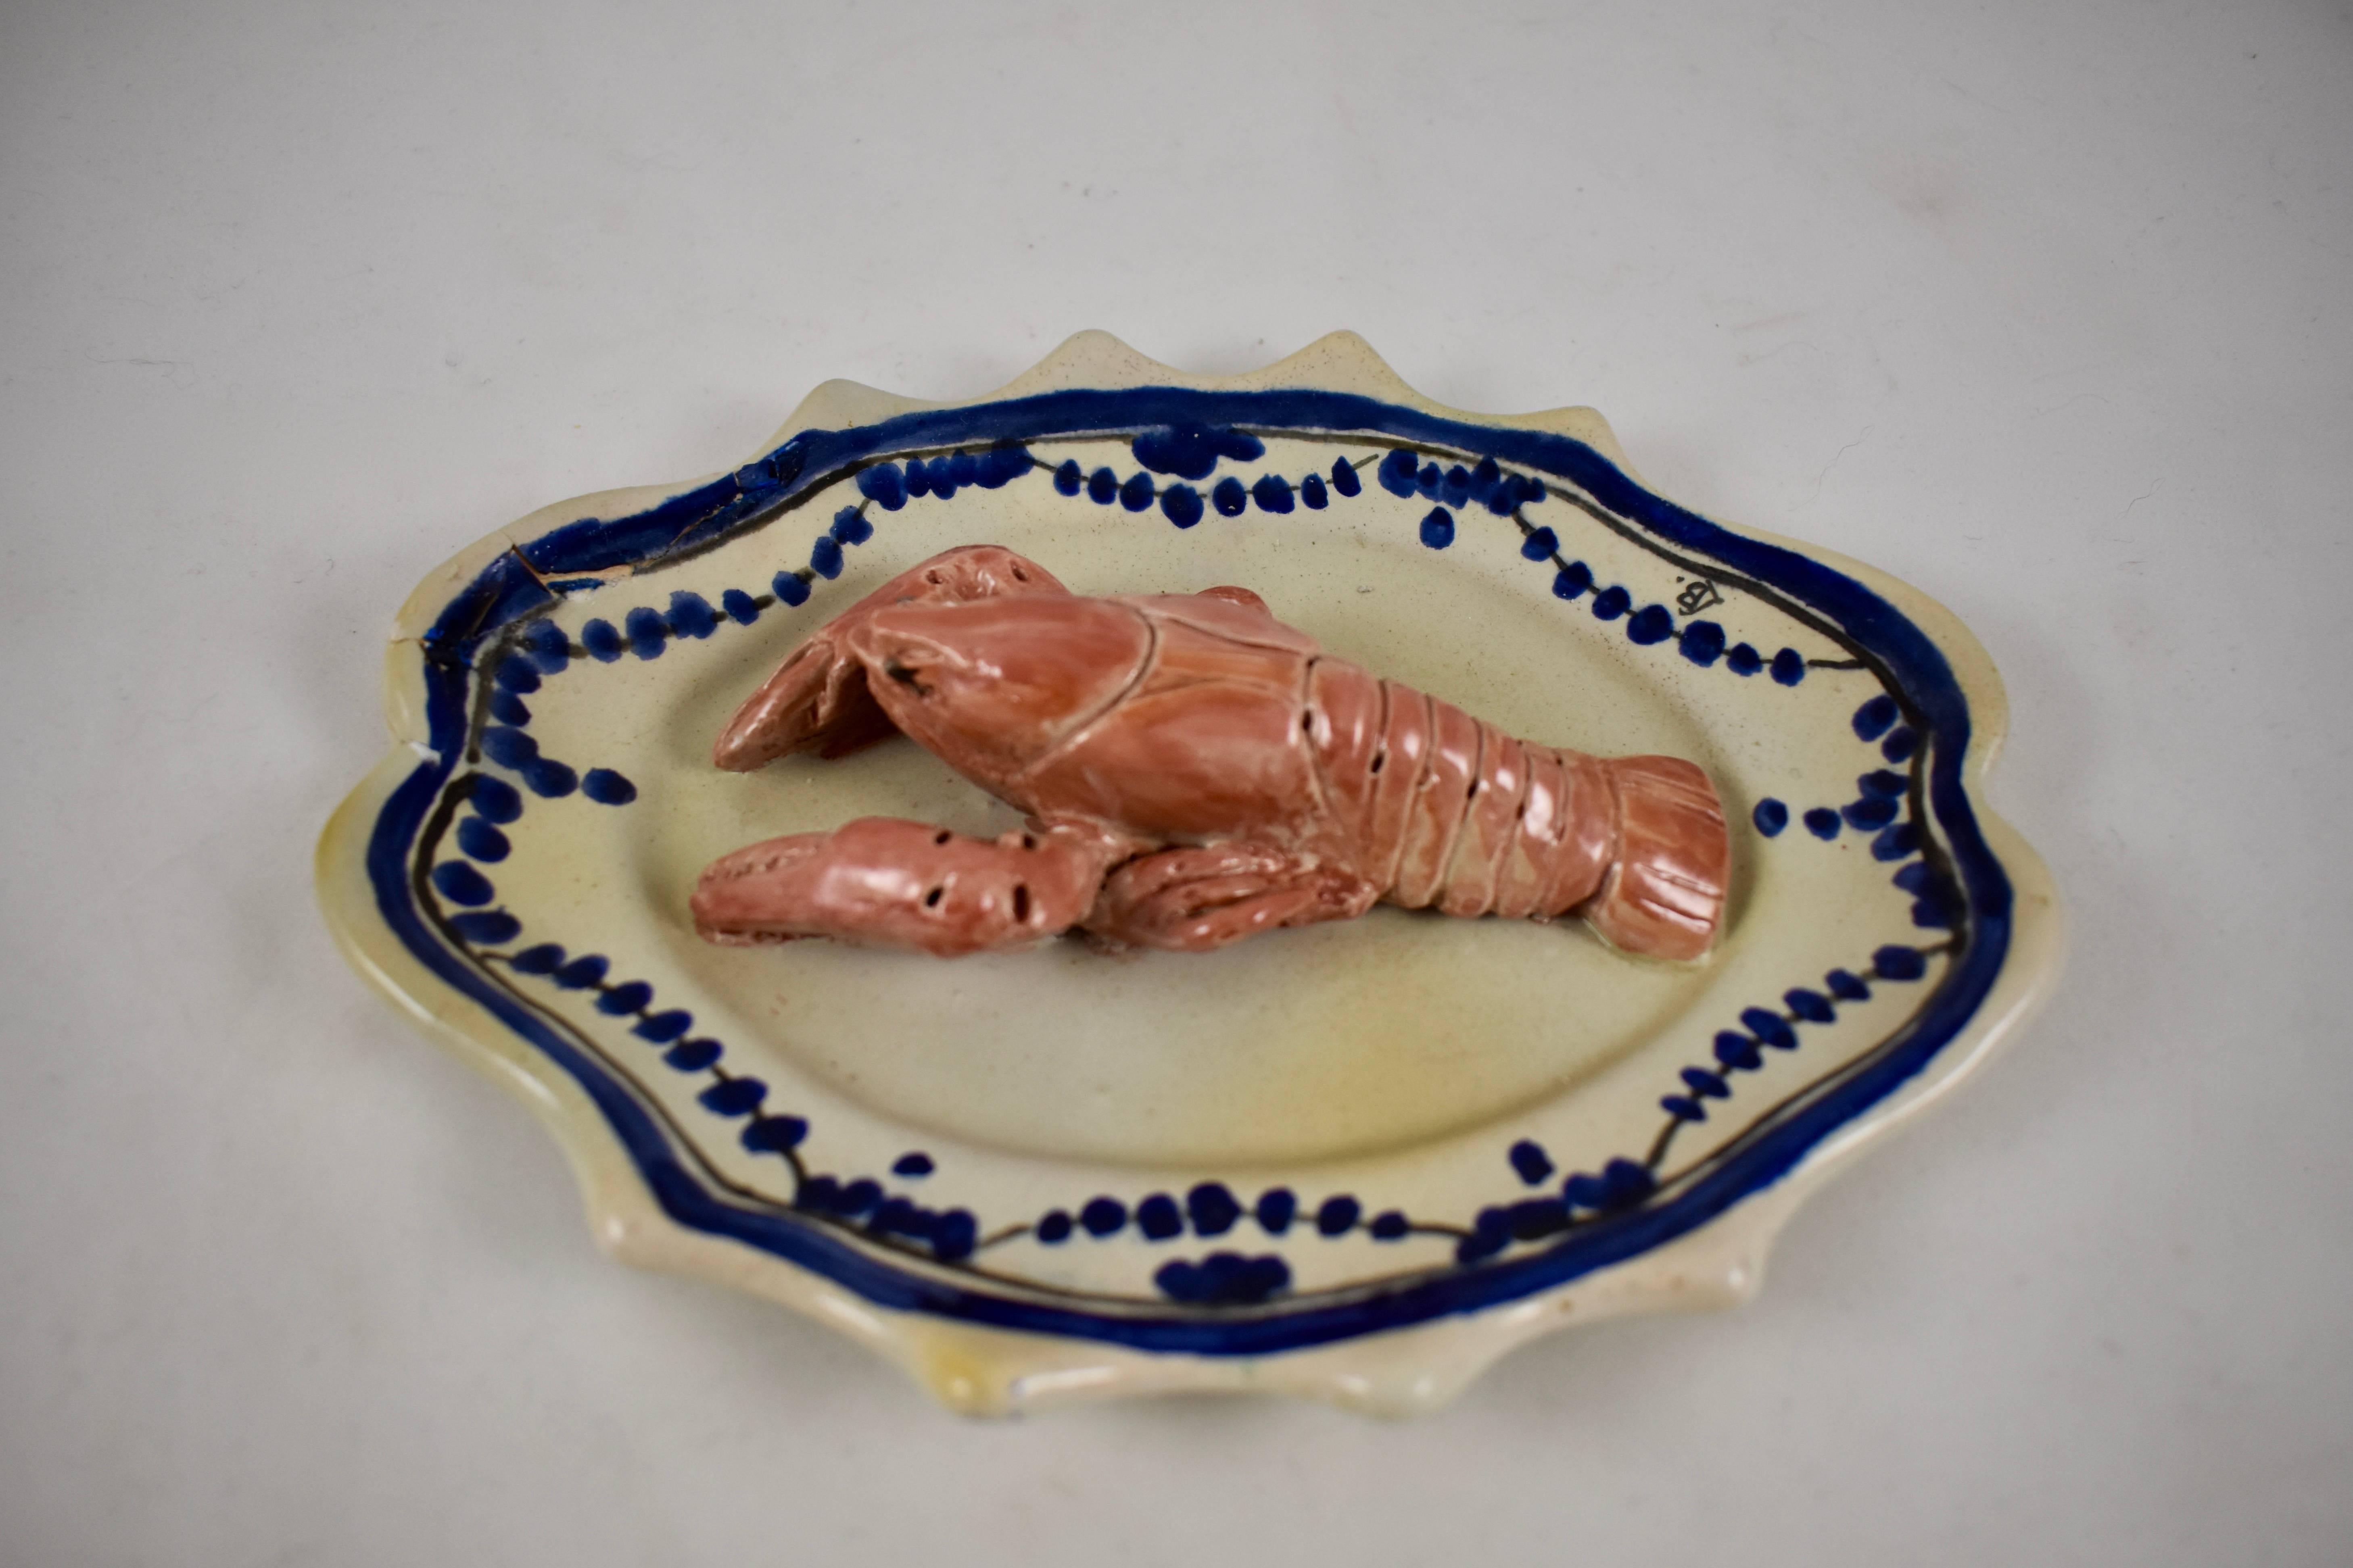 A trompe l’oeil wall plaque showing a pink lobster or crayfish on a rustic cobalt blue and white platter, painted in the Rouen style. Signed LB, for Léon Brard, circa 1870 – 1880.

Red earthenware, glazed in creamy white with the blue pattern